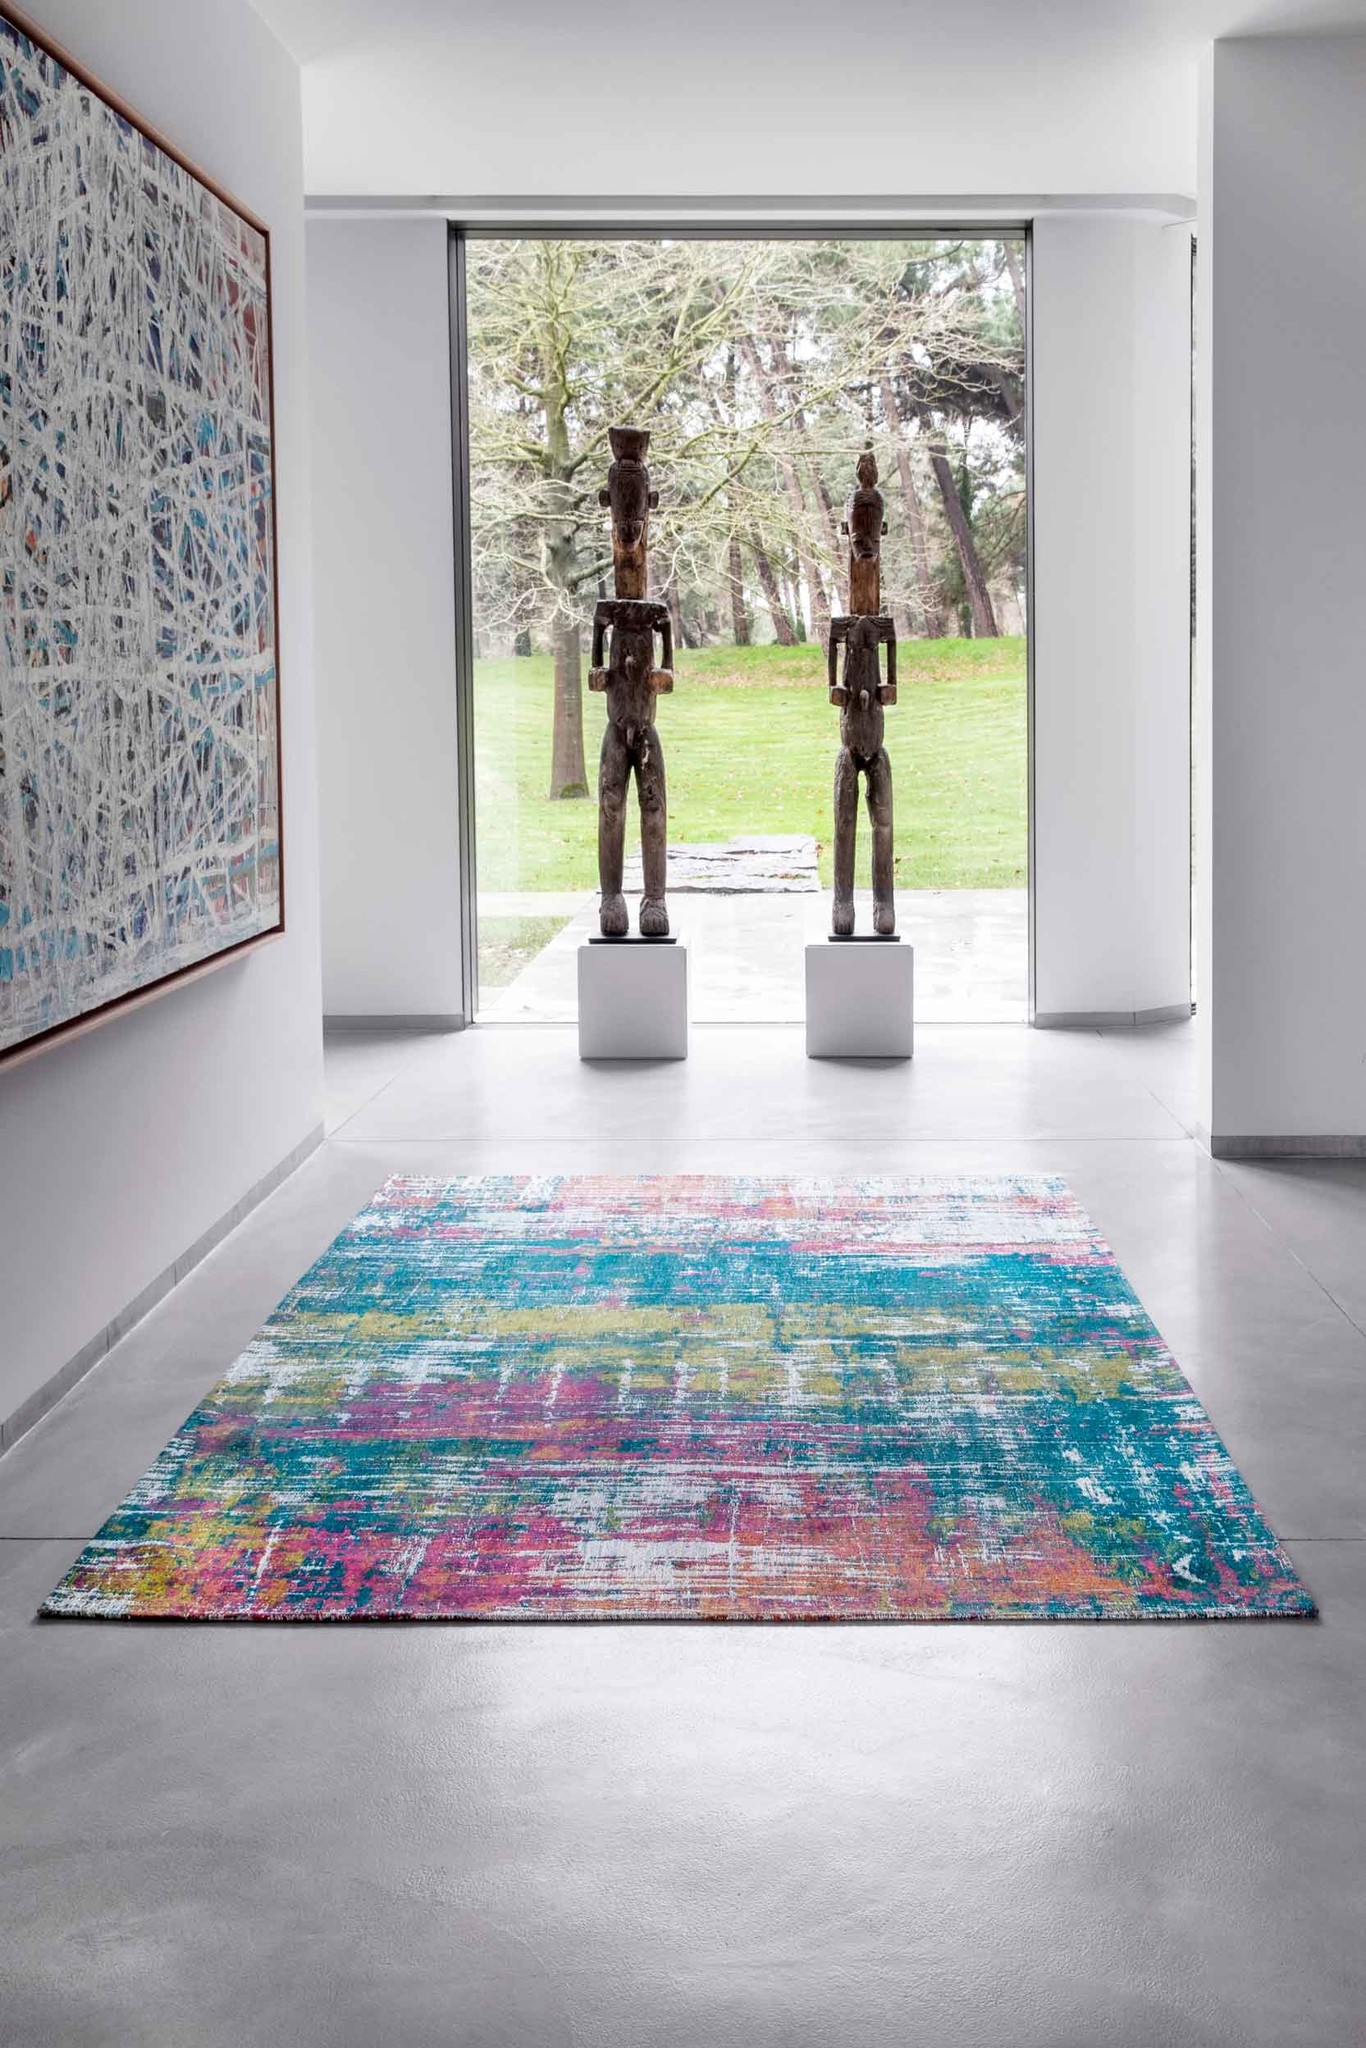 Abstract Multi Flatwoven Rug ☞ Size: 4' 7" x 6' 7" (140 x 200 cm)